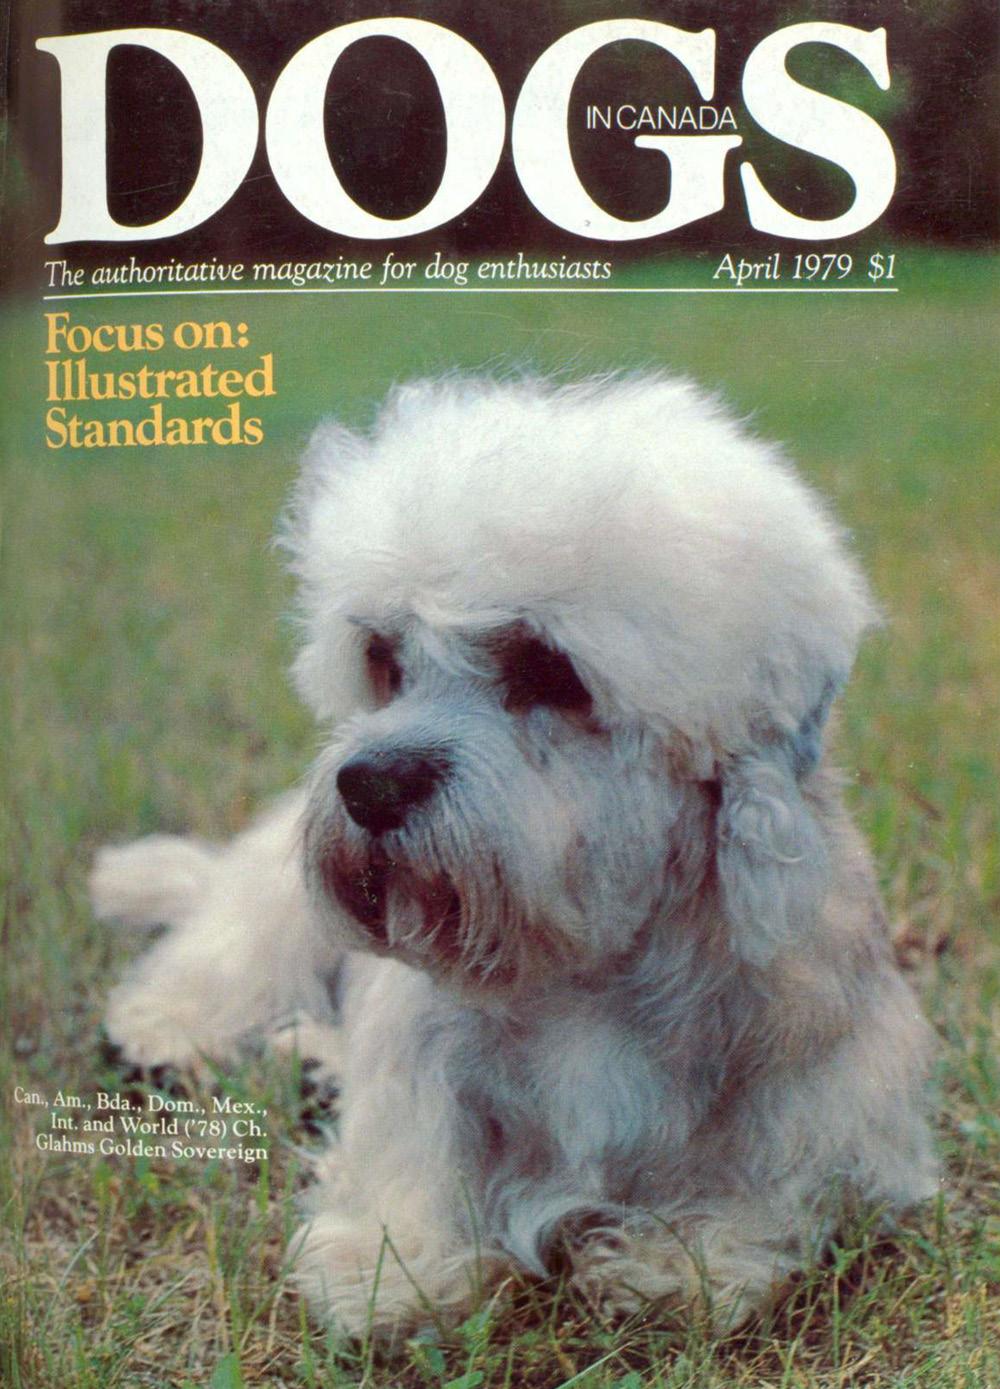 KENNEL AND BENCH APRIL 2019 2019 Tattoo Letter is G From our archives: This issue of Dogs in Canada was published in April 1979.